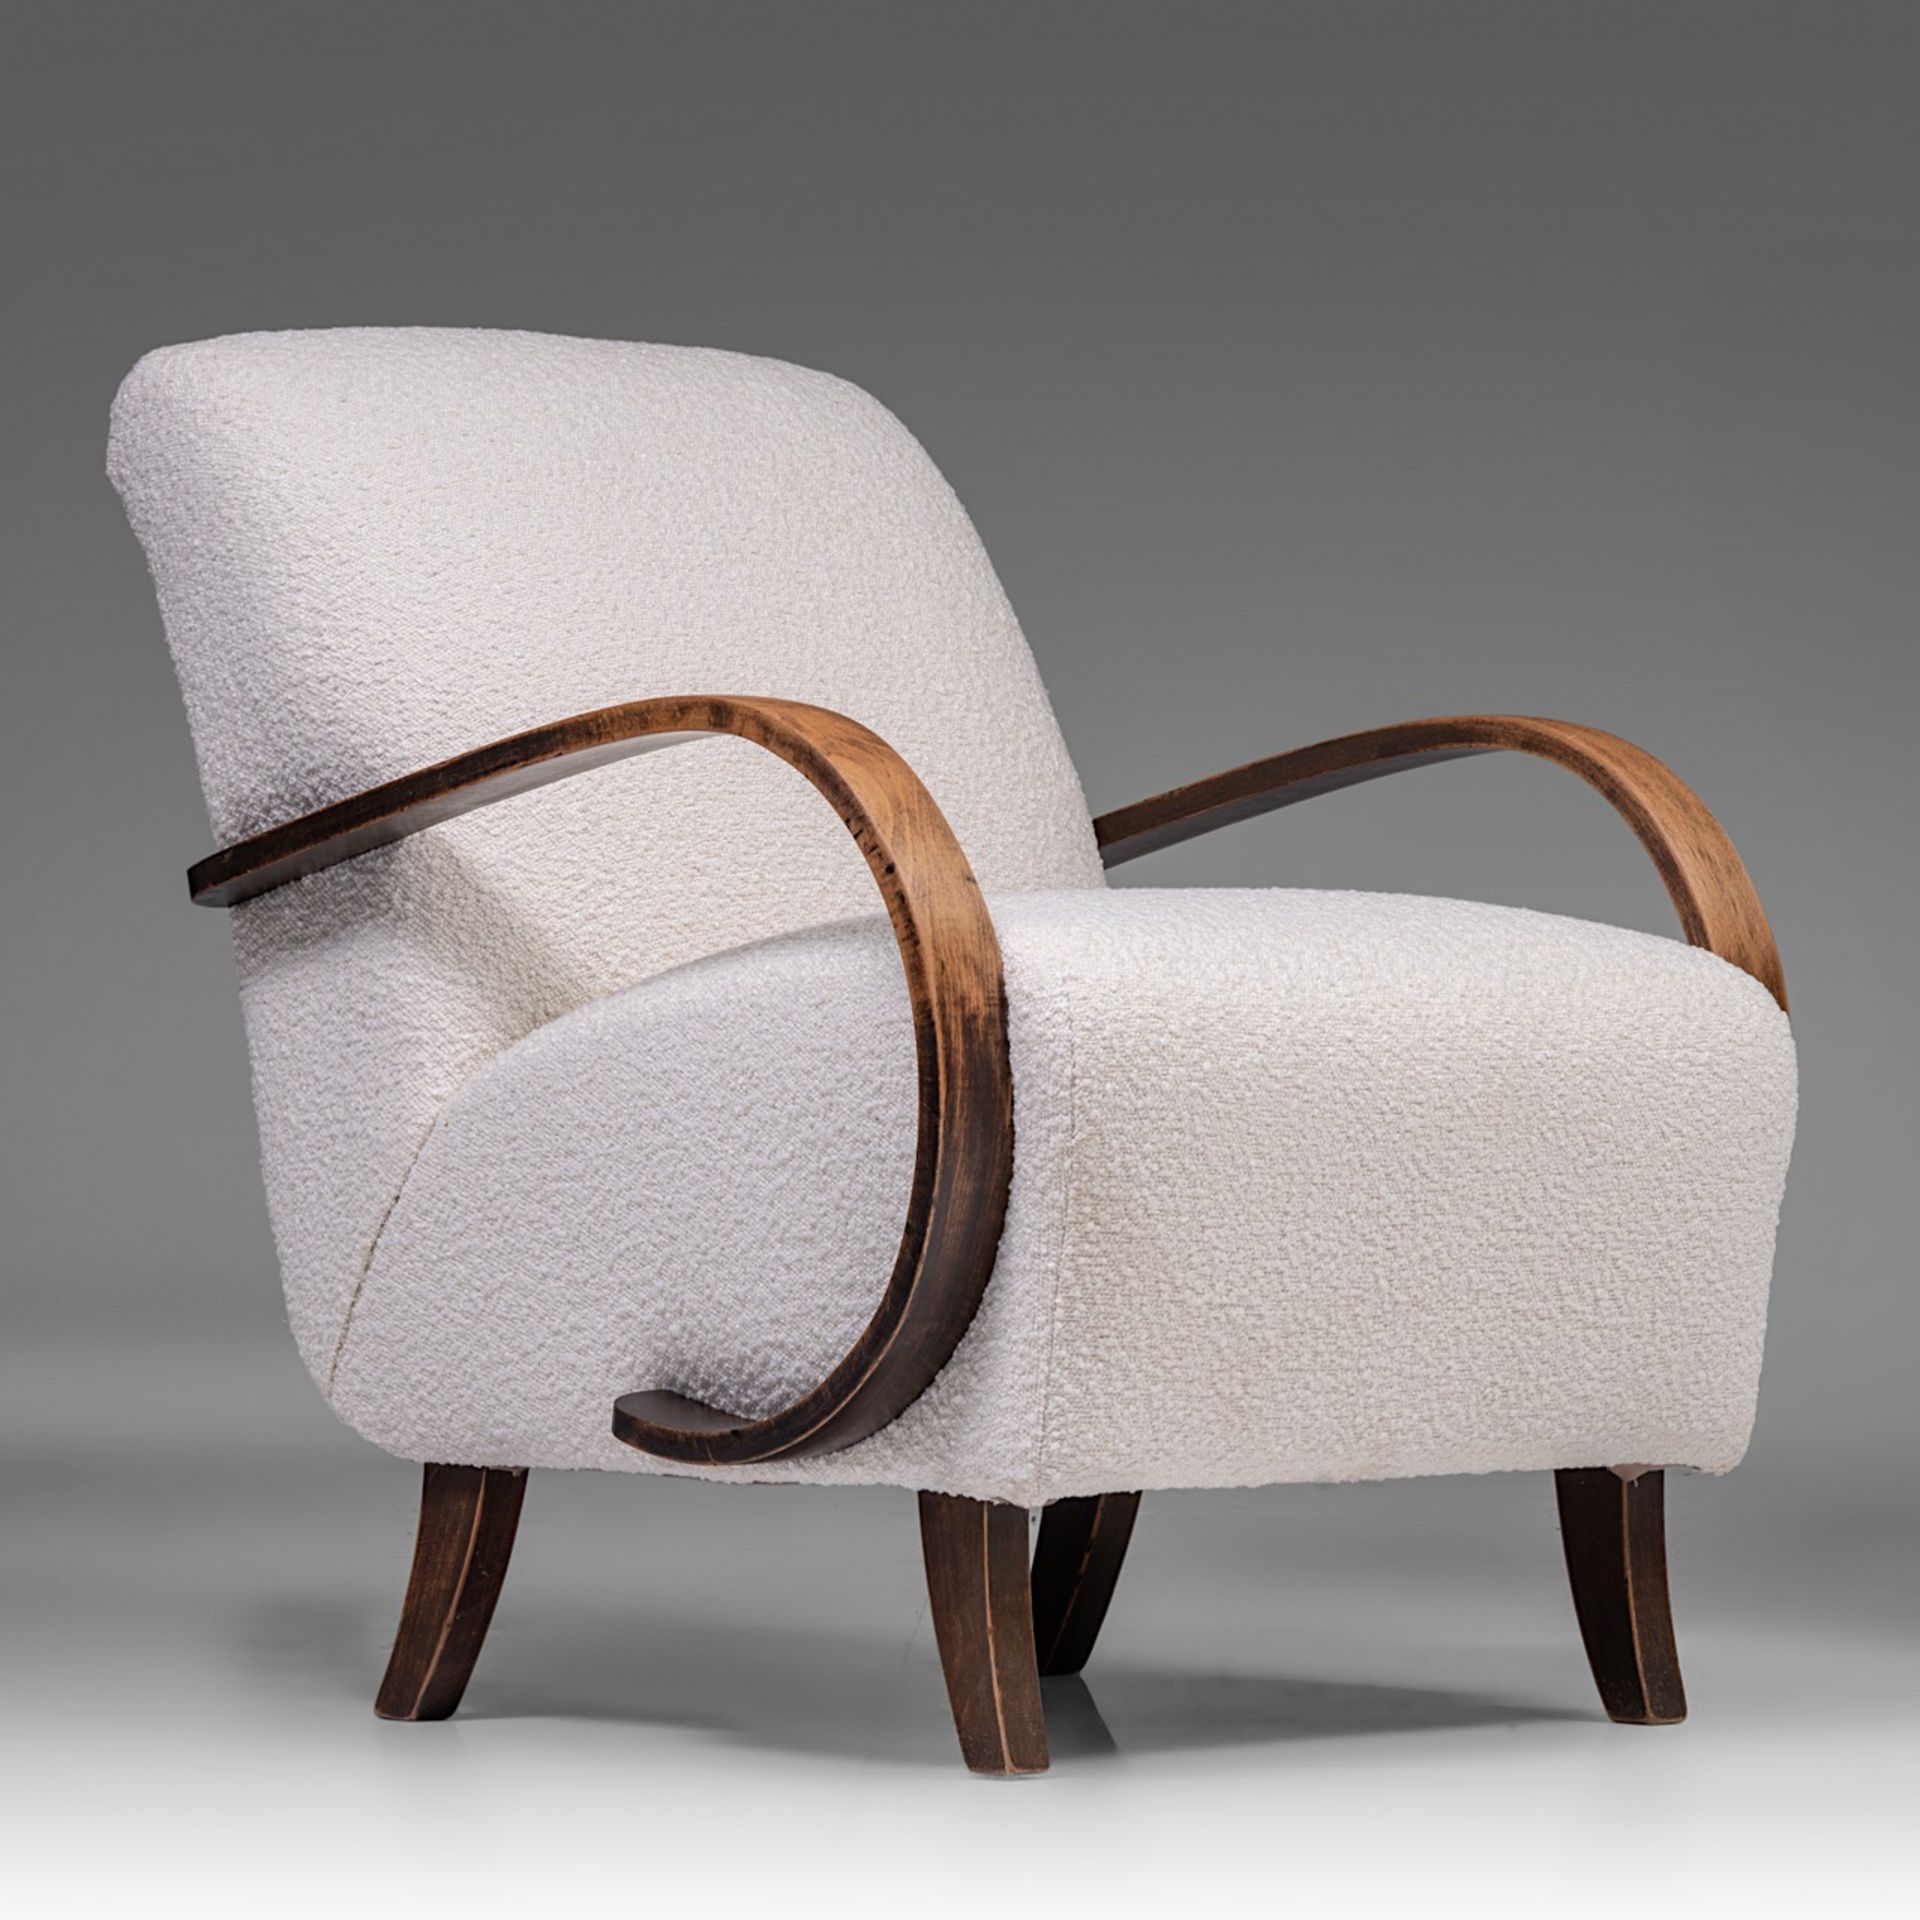 A pair of Mid-century Armchairs by Jindrich Halabala, 1950s 83 x 68 x 87 cm. (32.6 x 26.7 x 34 1/4 i - Image 9 of 13